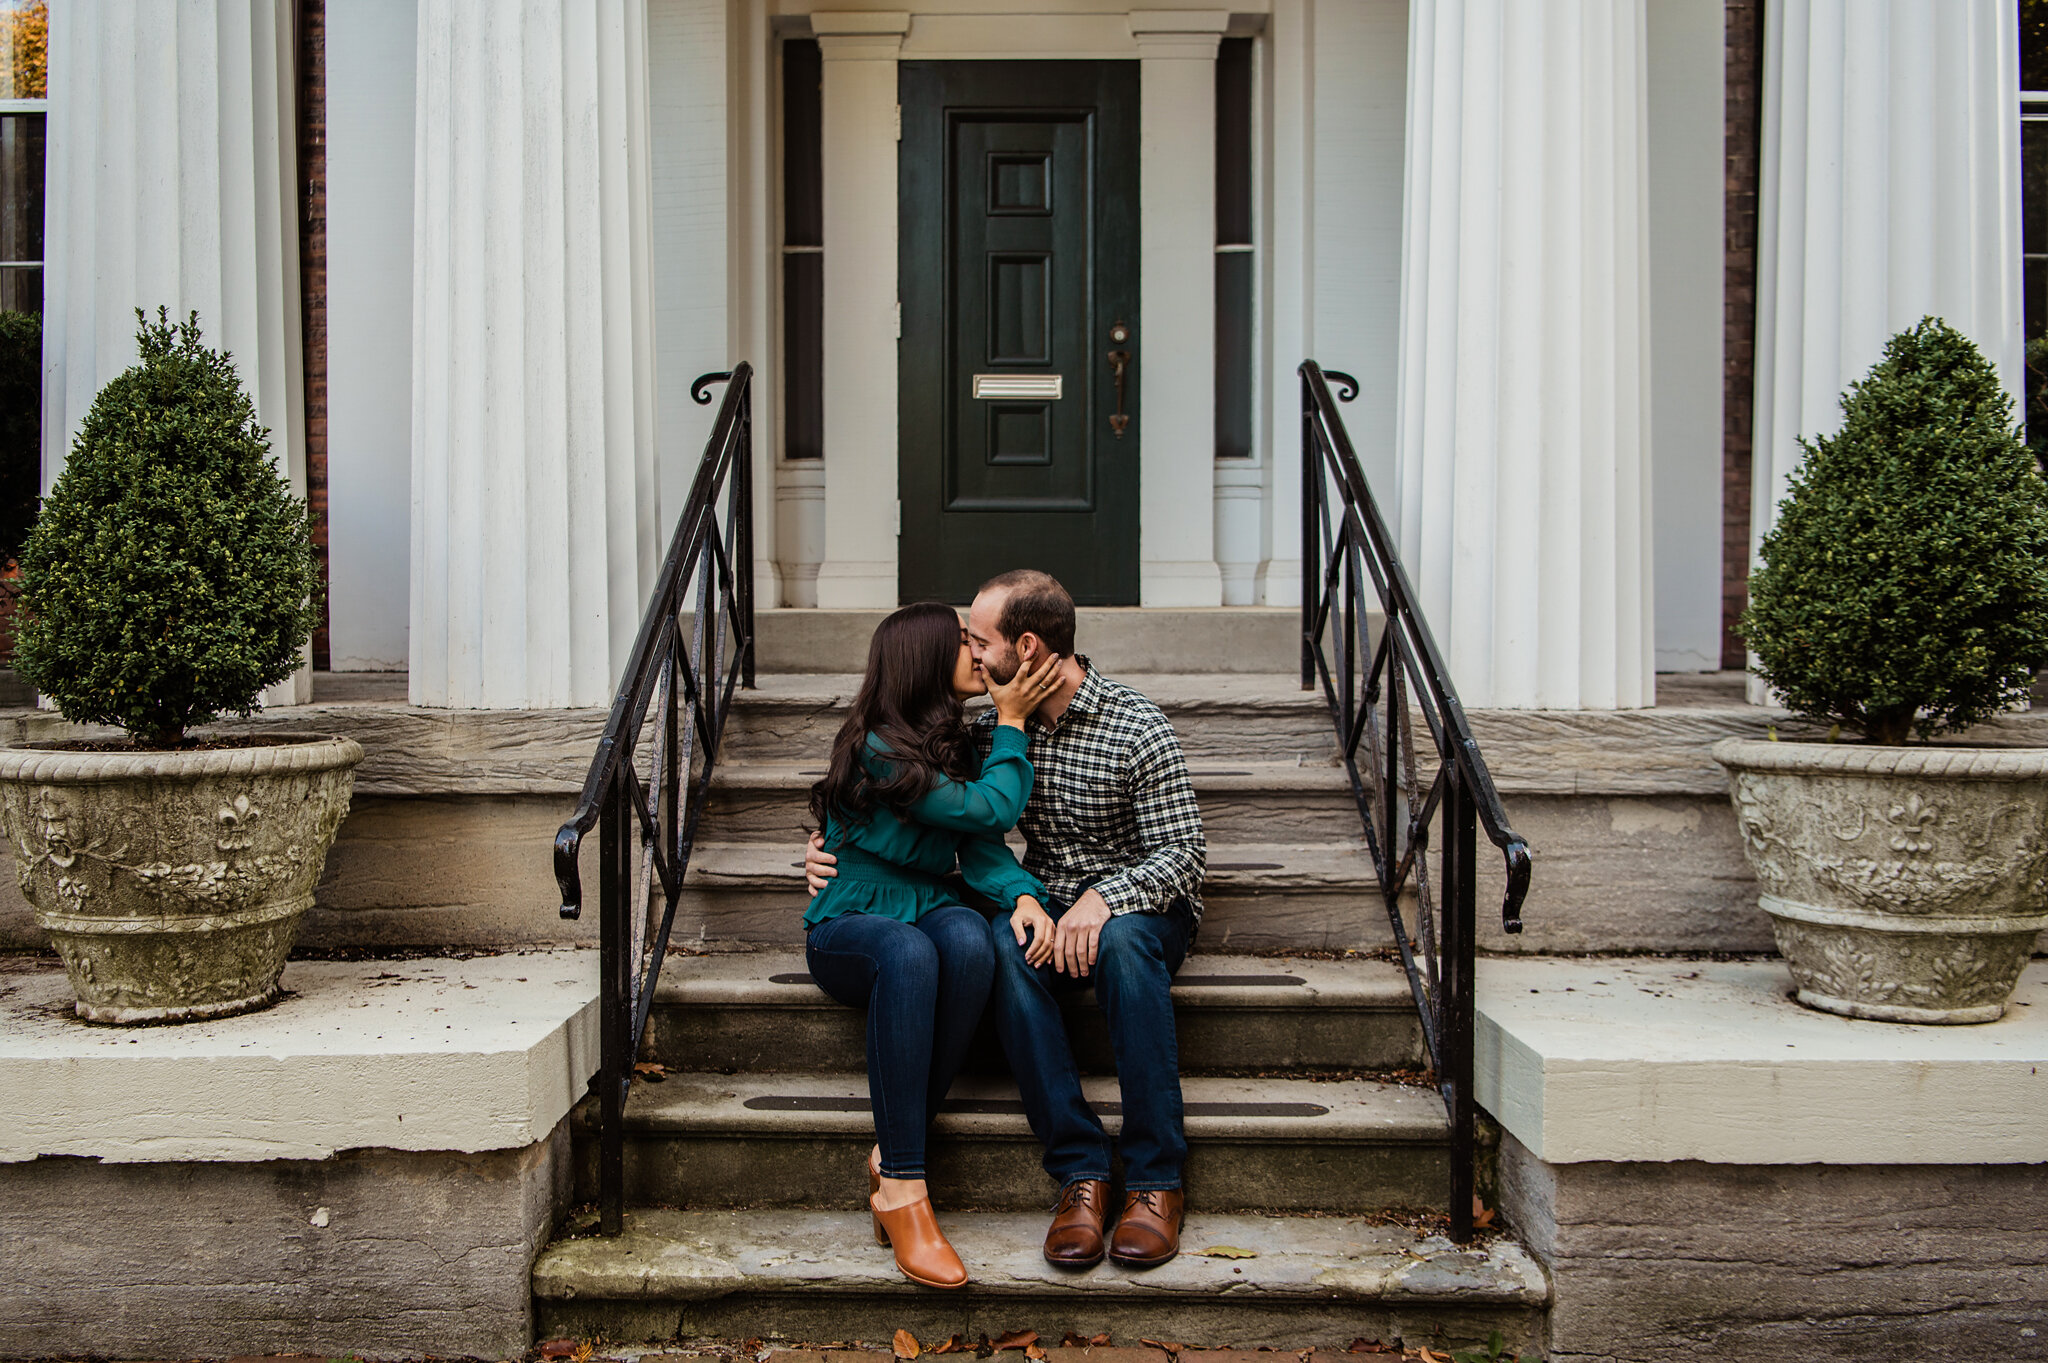 Genesee_Valley_Club_High_Falls_Rochester_Engagement_Session_JILL_STUDIO_Rochester_NY_Photographer_1248.jpg